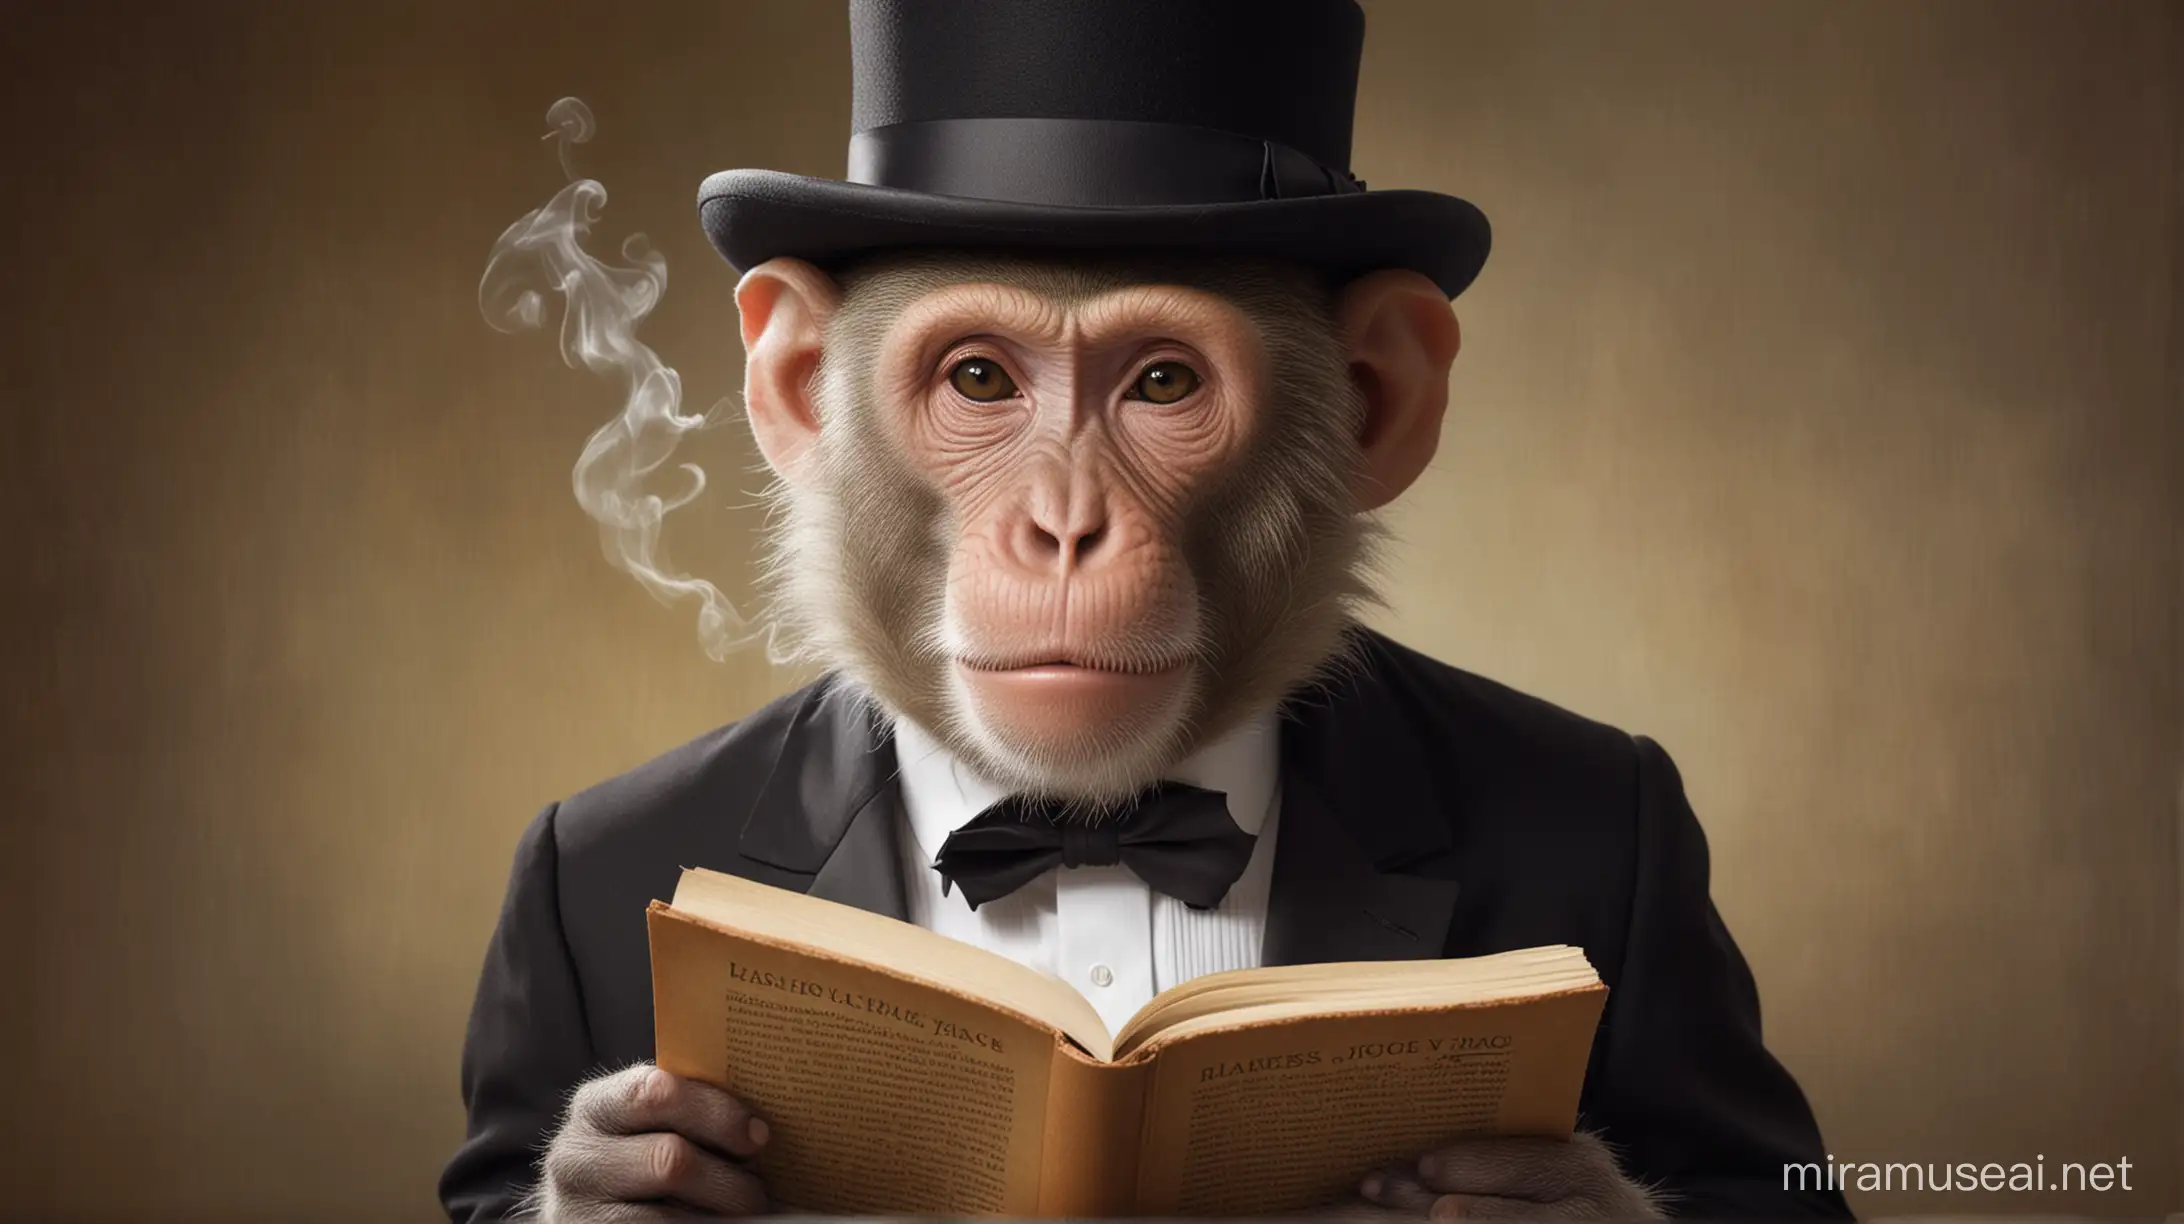 Intelligent Ape Immersed in James Joyces ULYSSES While Sporting a Dapper Tuxedo and Vape